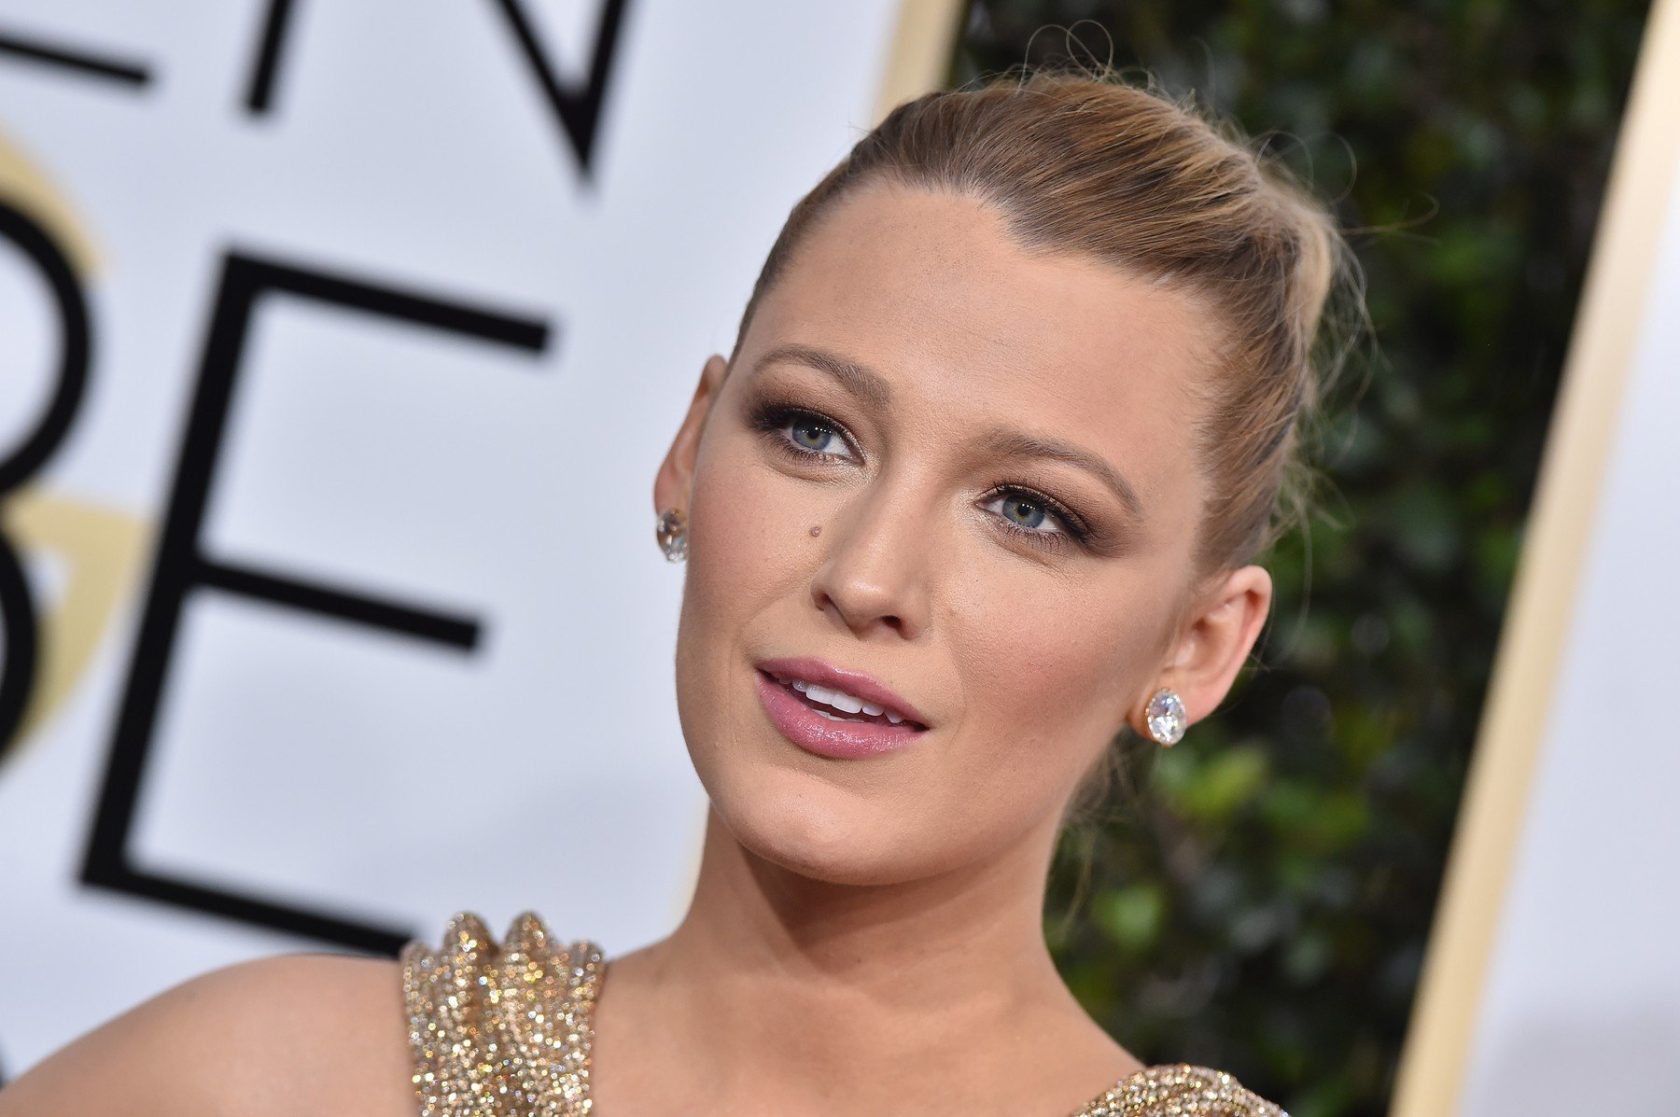 74th Annual Golden Globe Awards - Arrivals. The Beverly Hilton Hotel, Beverly Hills, CA. Pictured: Blake Lively. EVENT January 8, 2016 Job: 170108A2, Image: 310360299, License: Rights-managed, Restrictions: 000, Model Release: no, Credit line: Profimedia, Bauer Griffin